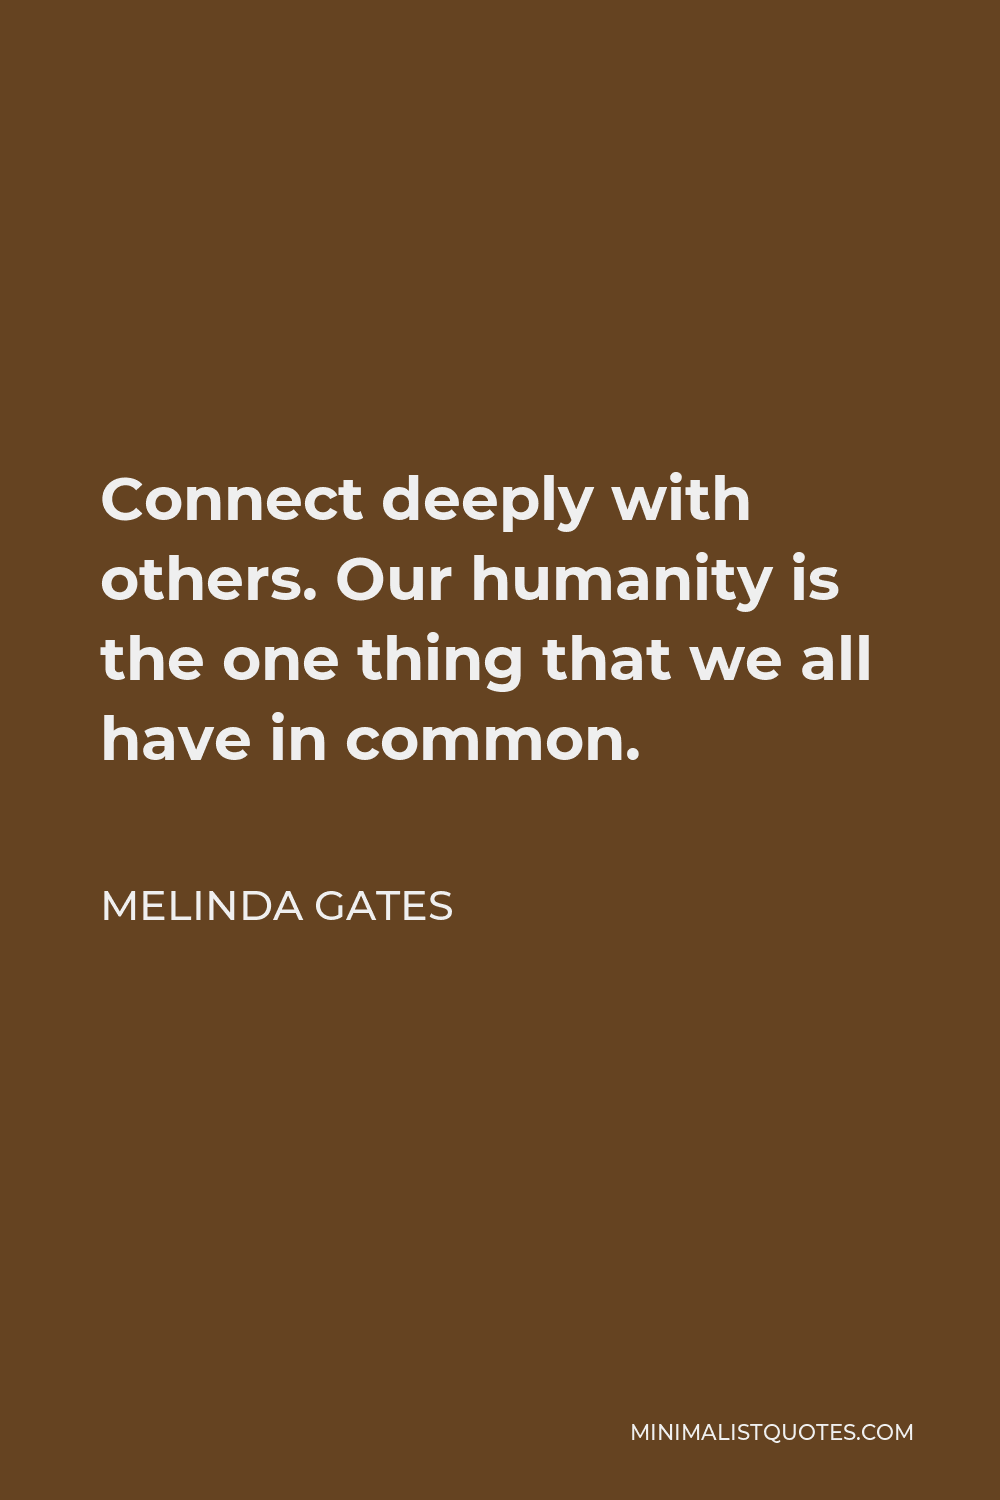 Melinda Gates Quote - Connect deeply with others. Our humanity is the one thing that we all have in common.